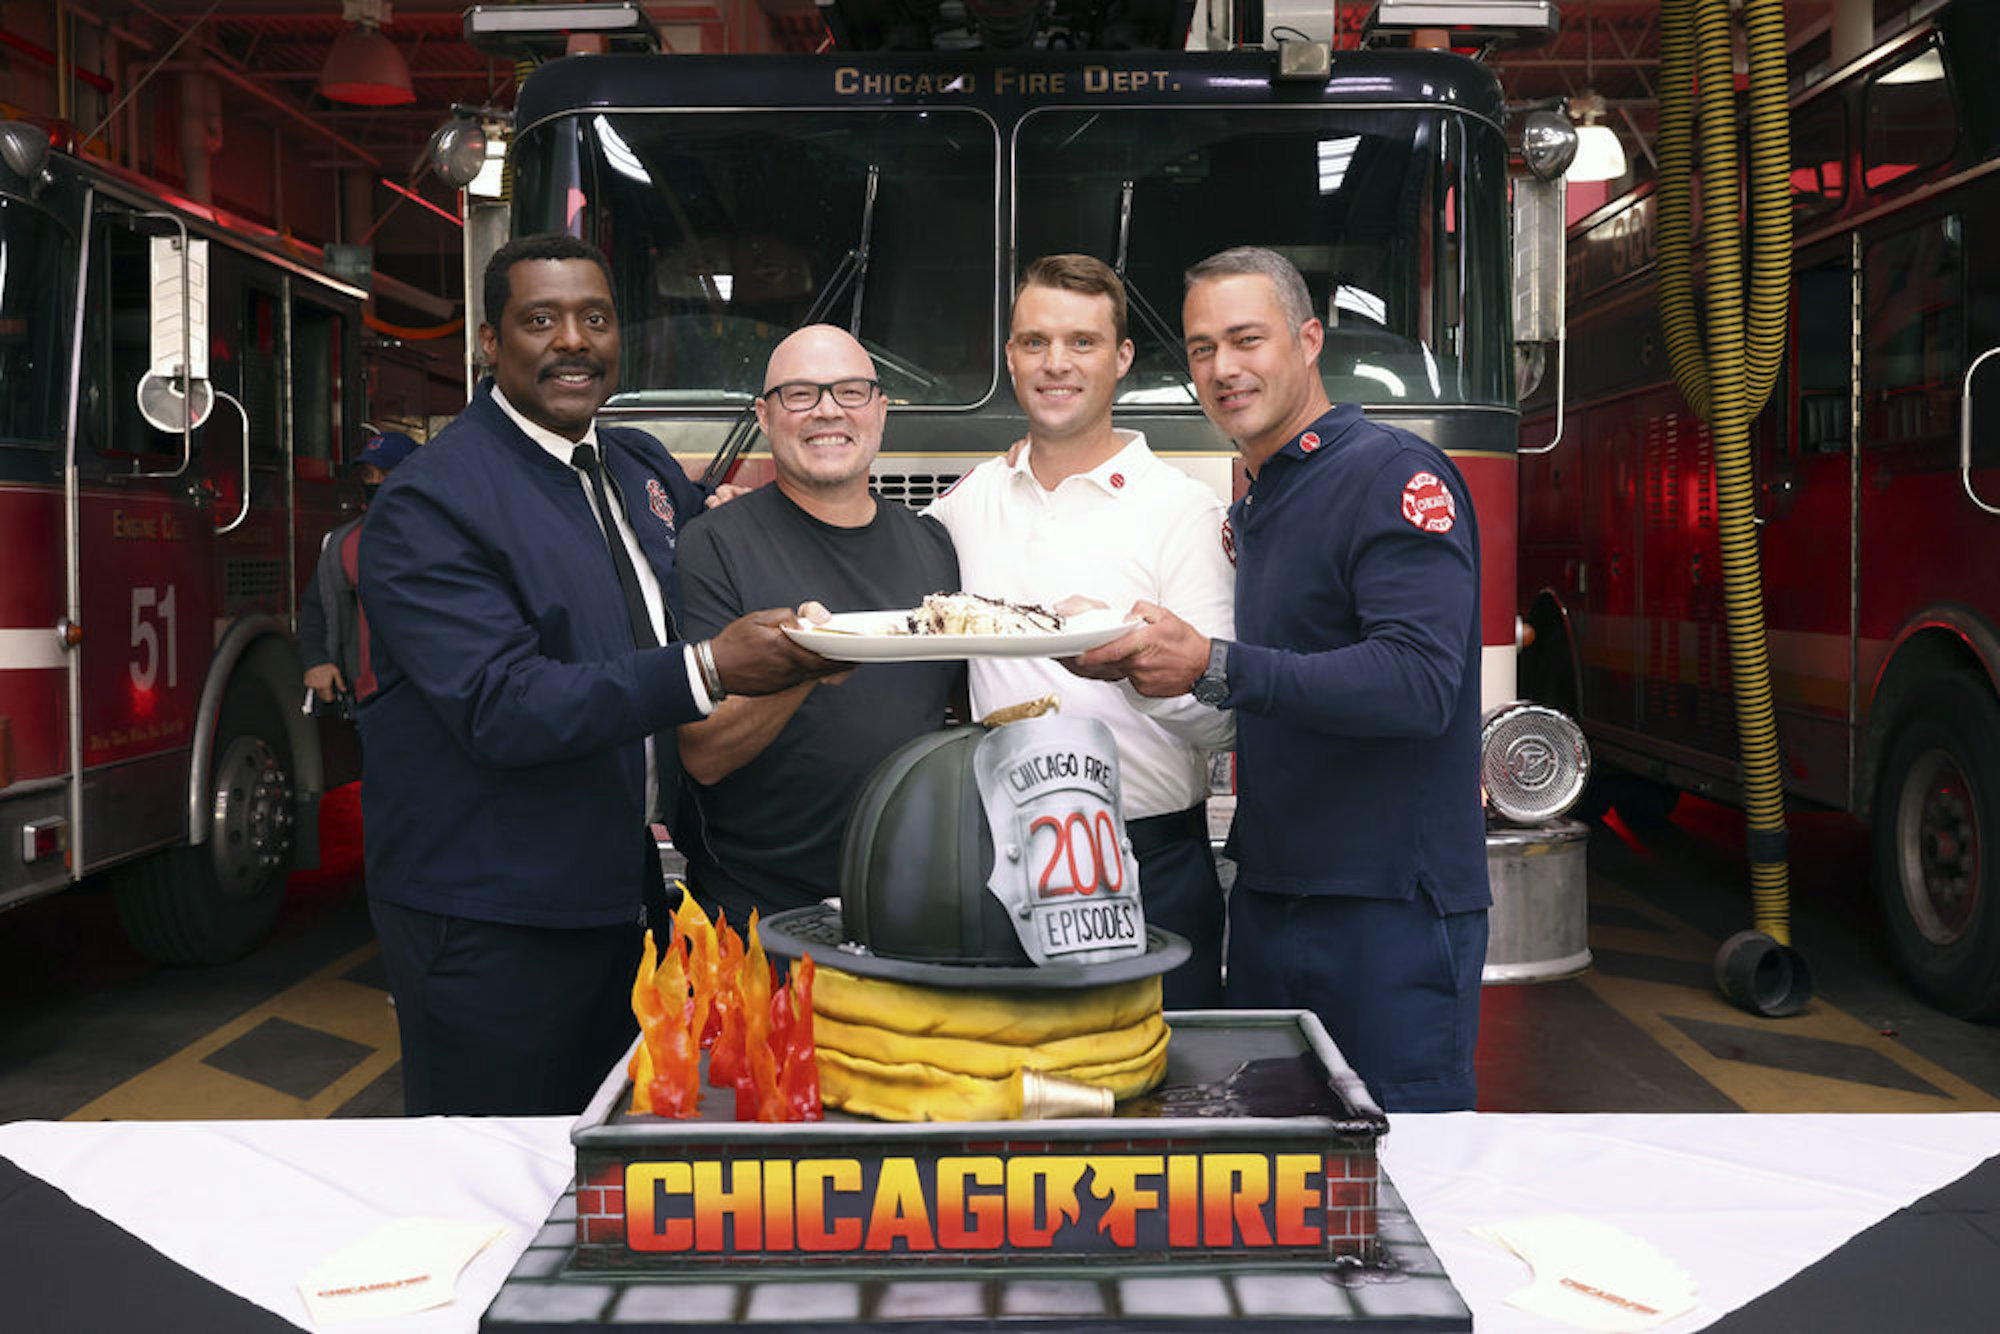 Eamonn Walker, Derek Haas, Jesse Spencer, and Taylor Kinney from the 'Chicago Fire' cast smiling and celebrating 'Chicago Fire' episode 200